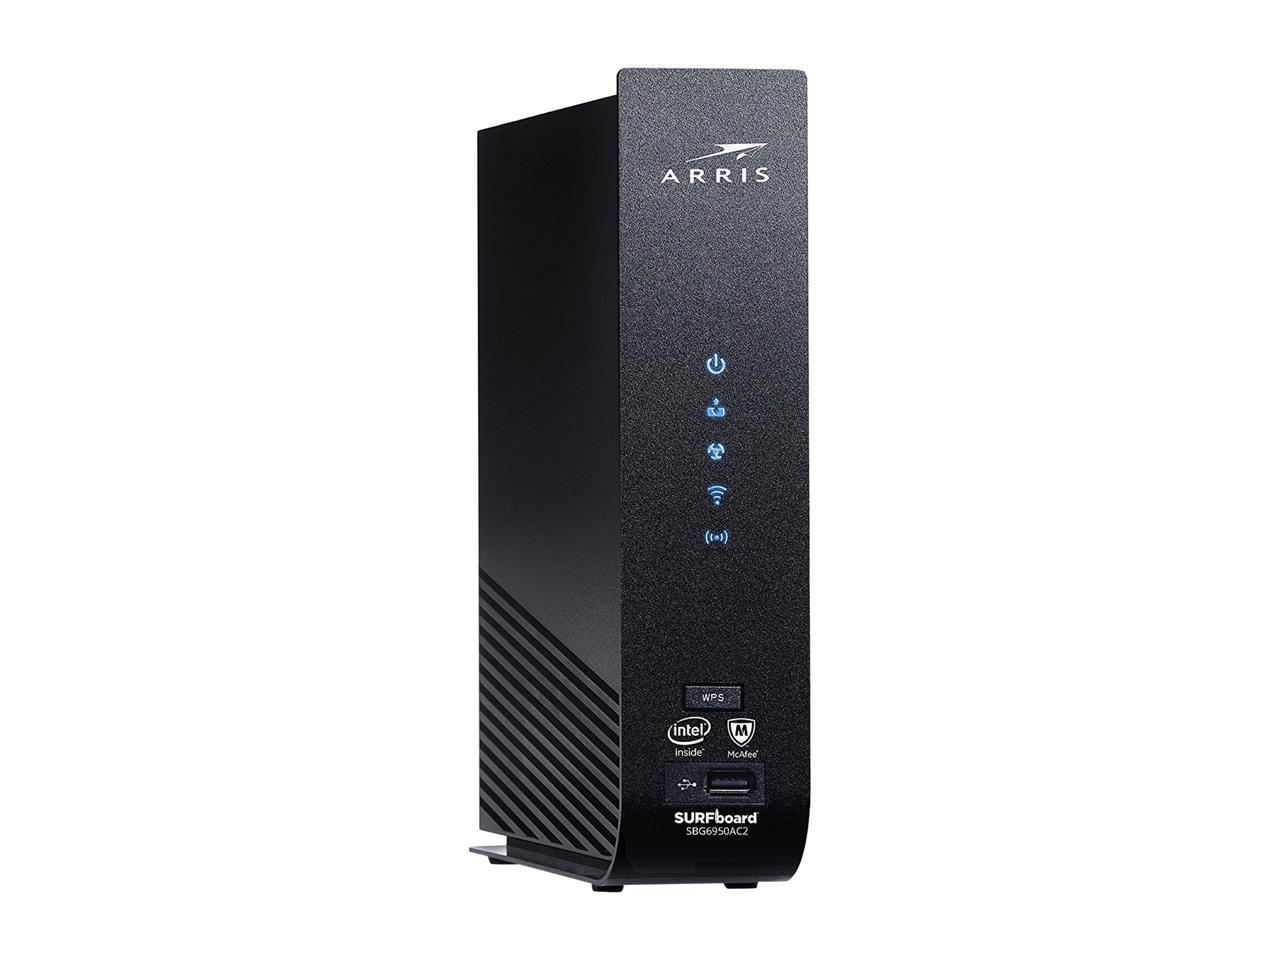 Arris SURFboard SBG6950AC2 DOCSIS 3.0 Consumer Series Wireless Cable Modem User Manual